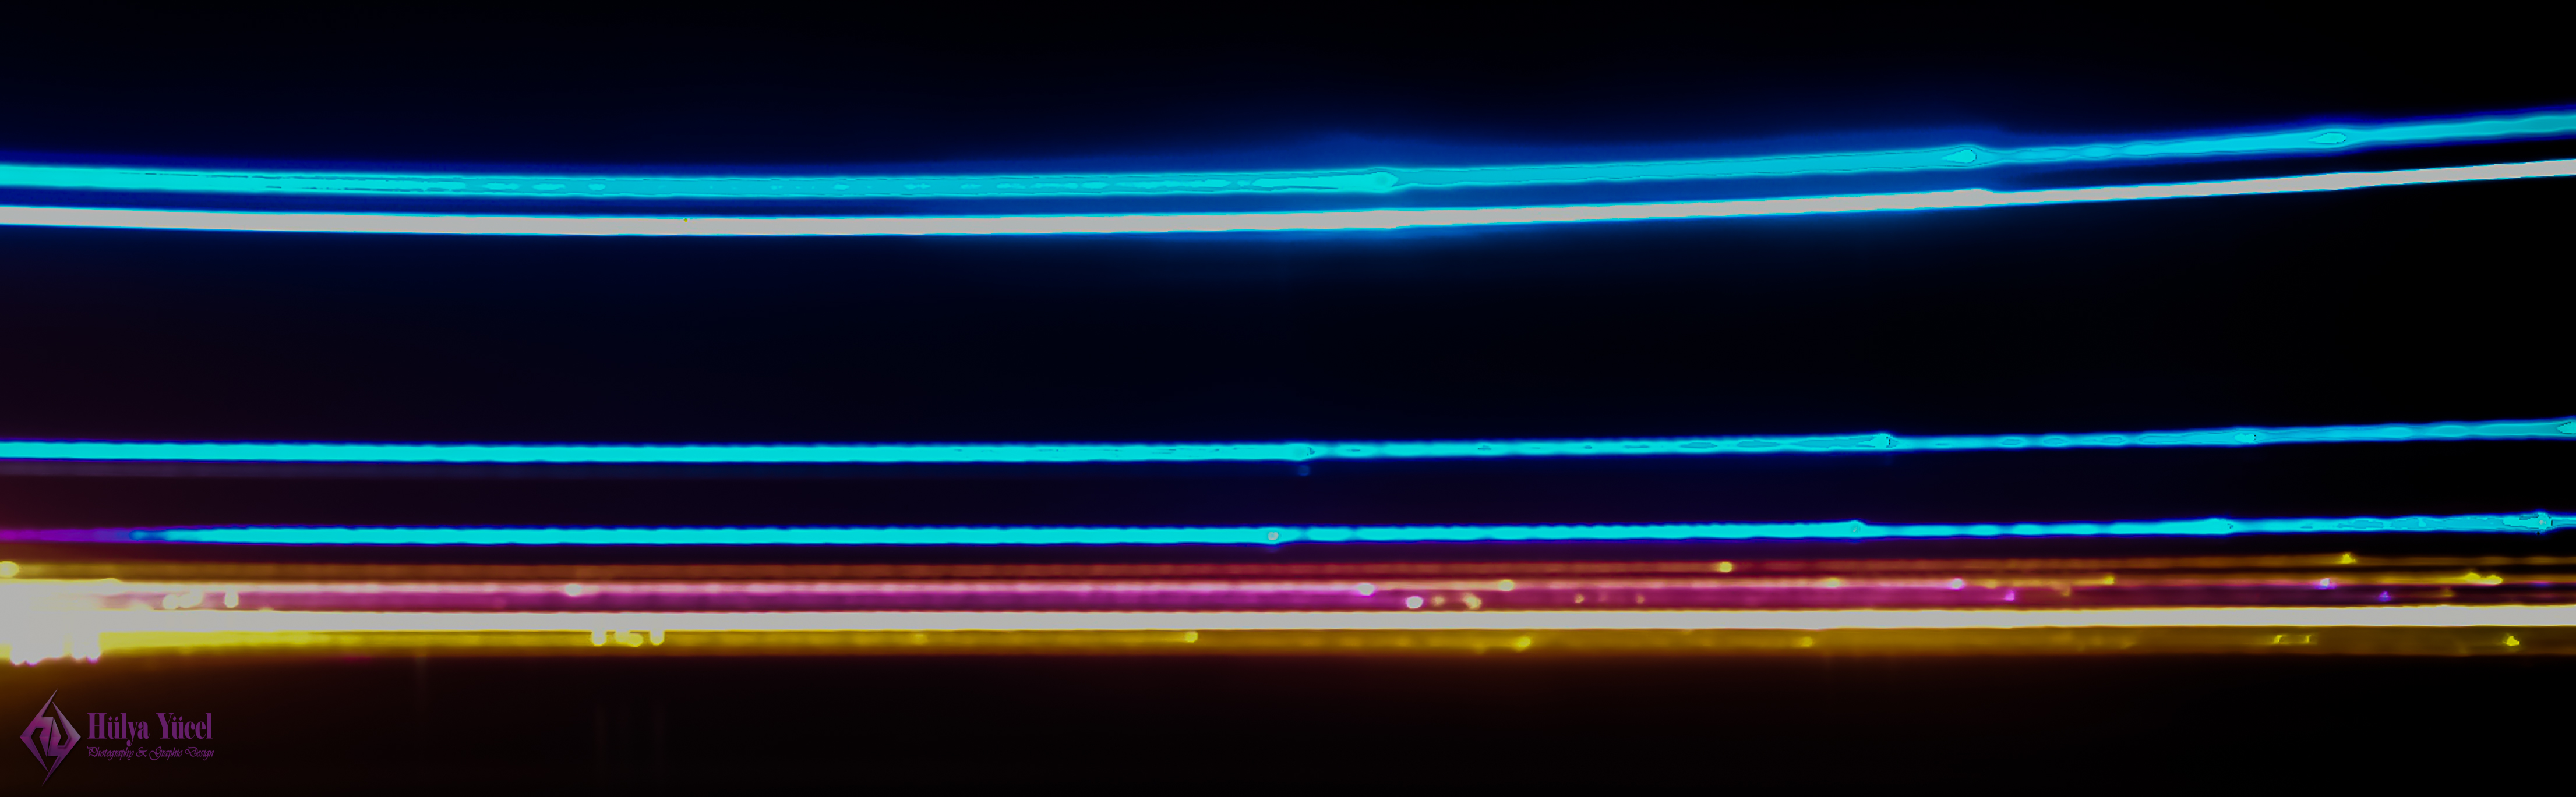 long exposure colored straight lines